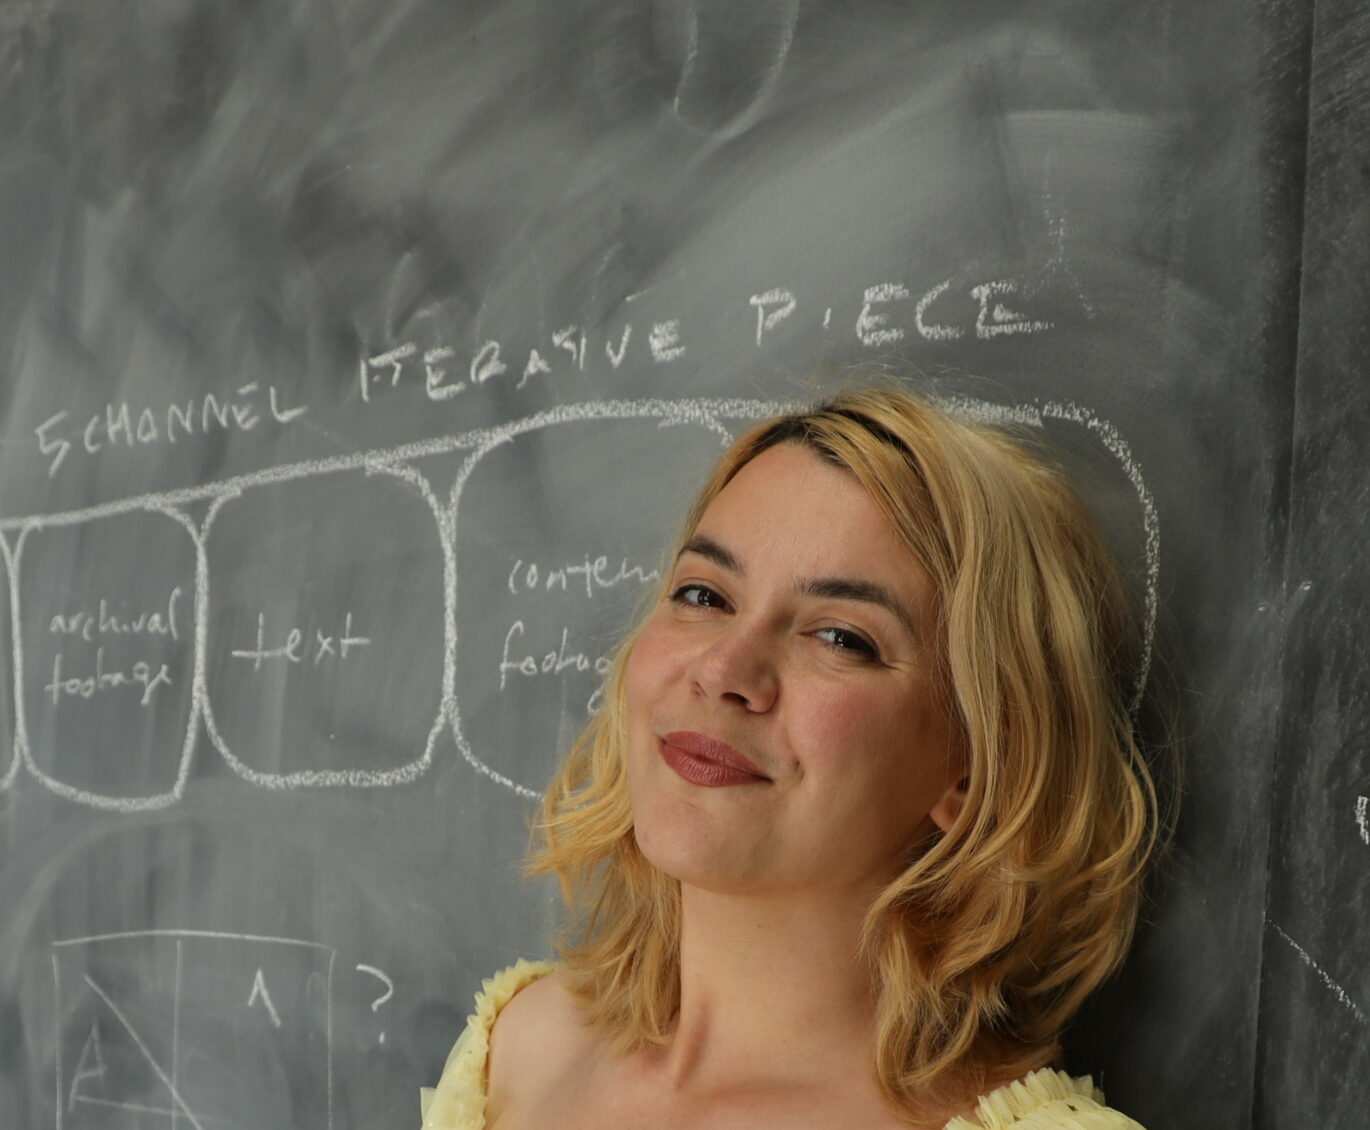 A person with shoulder-length blonde hair and red lipstick leans against a blackboard and smiles closed-lipped